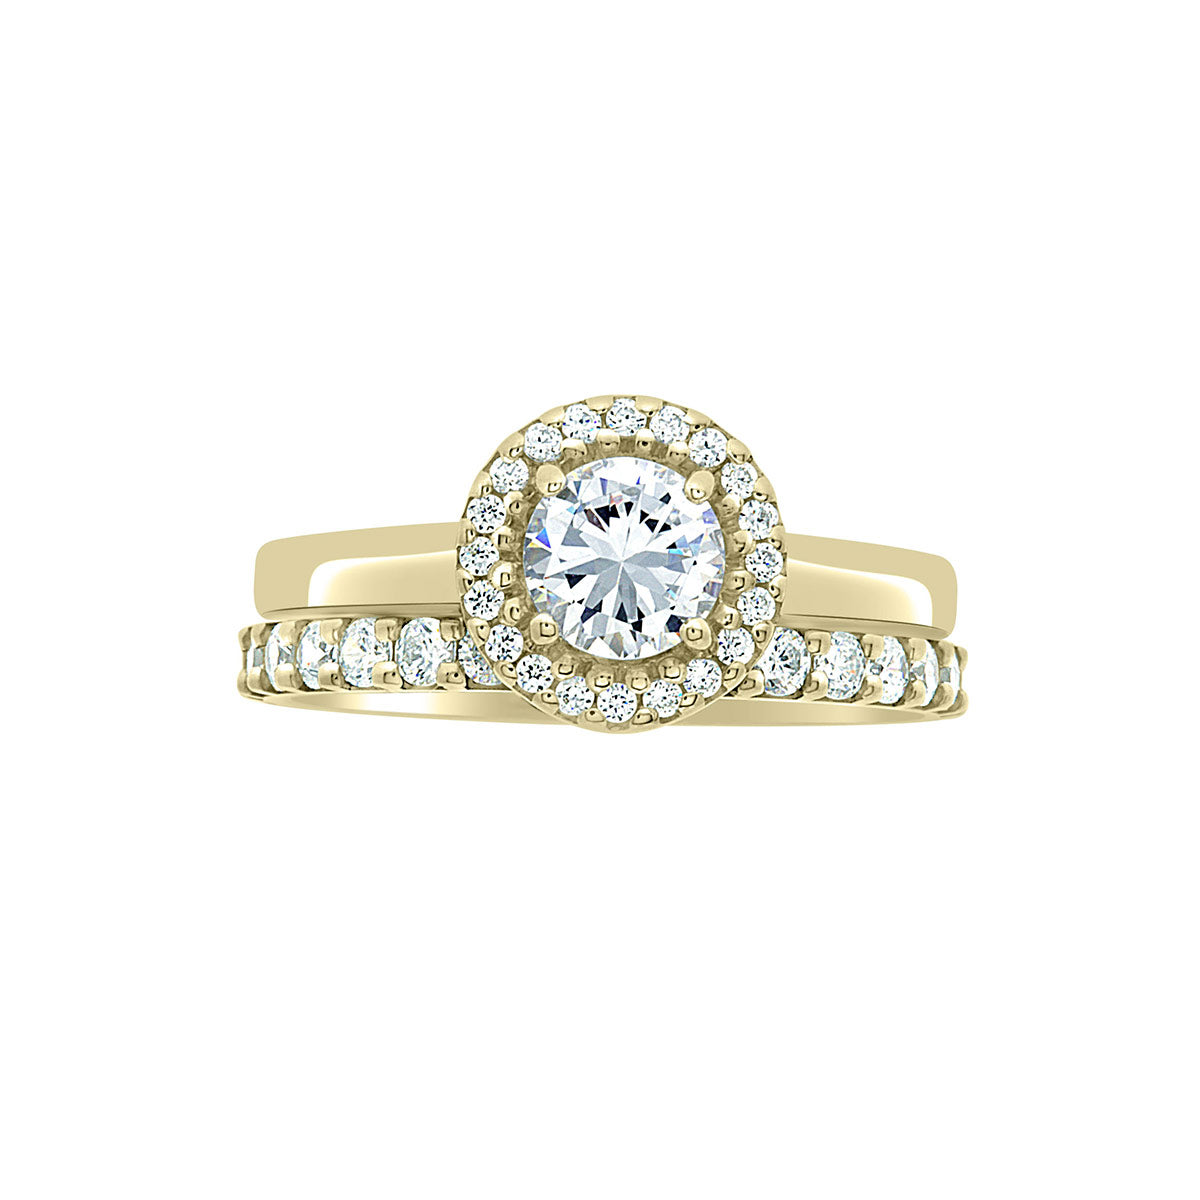 Round Vintage Engagement Ring in yellow gold,  a horizontal position against a white background. Also featuring a matching diamond set wedding band